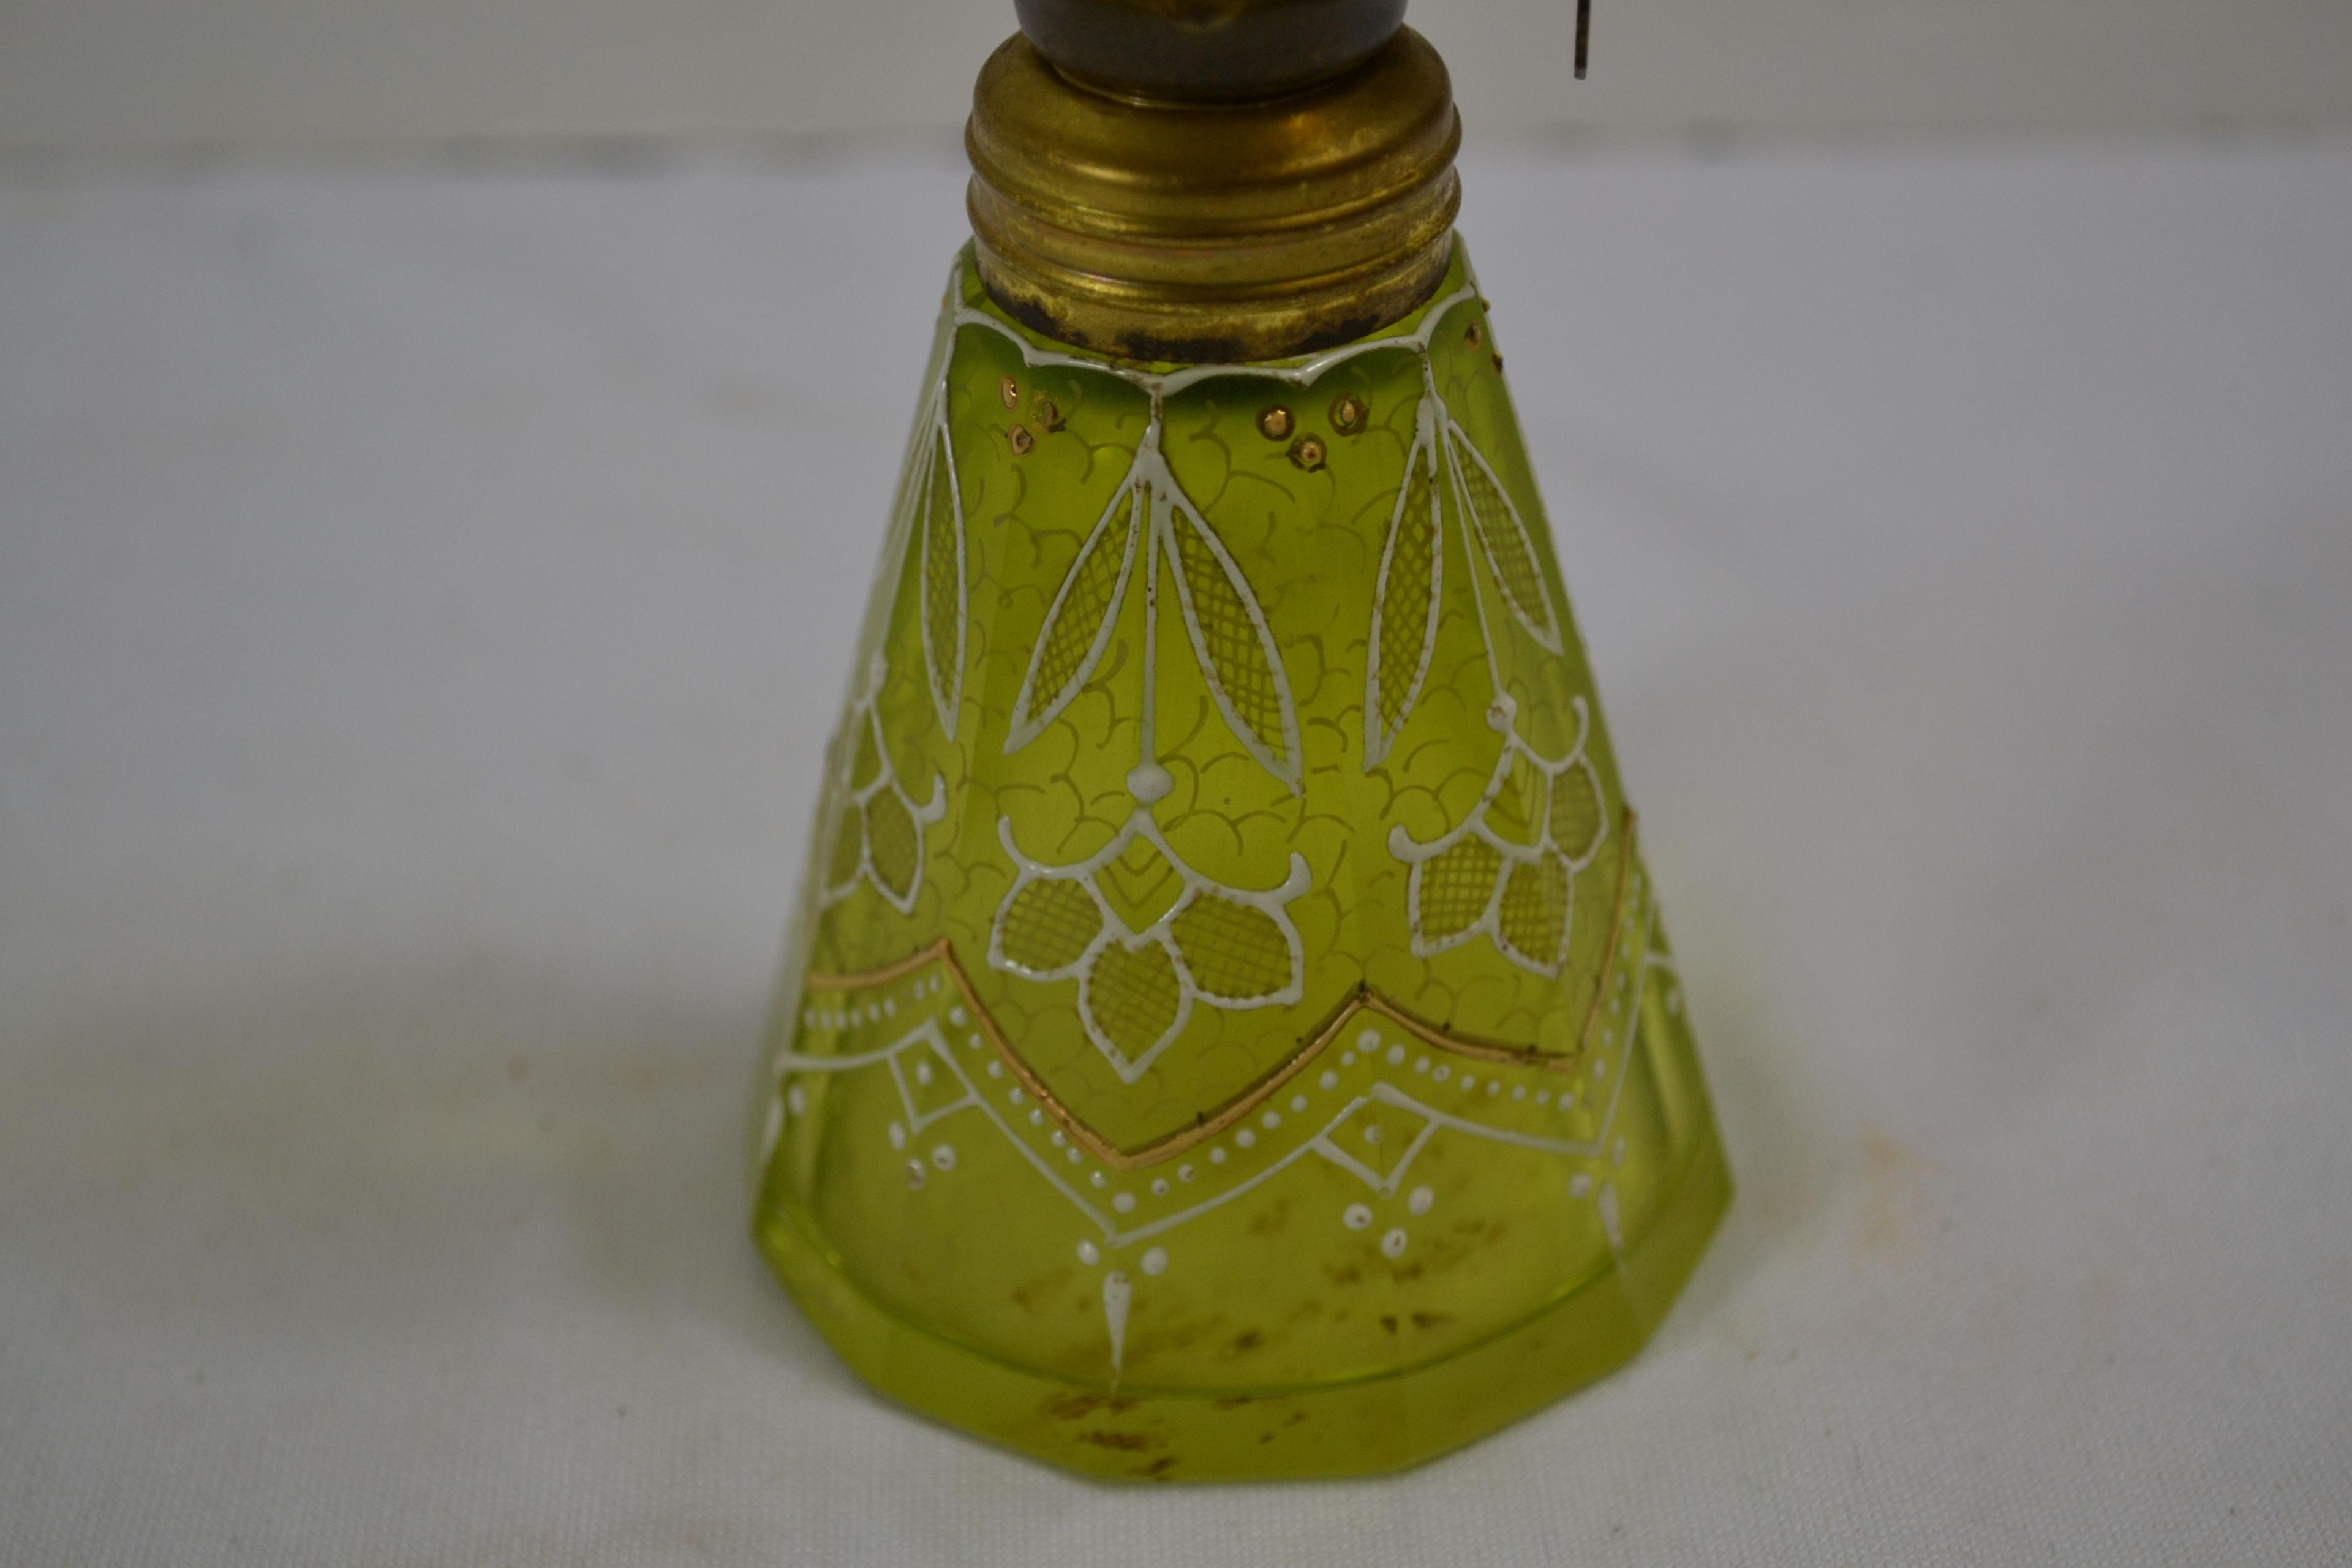 Vintage Green Mini Oil Lamp w/Applied Enamel White and Gold Paint; 3" High' Small Chip on Base